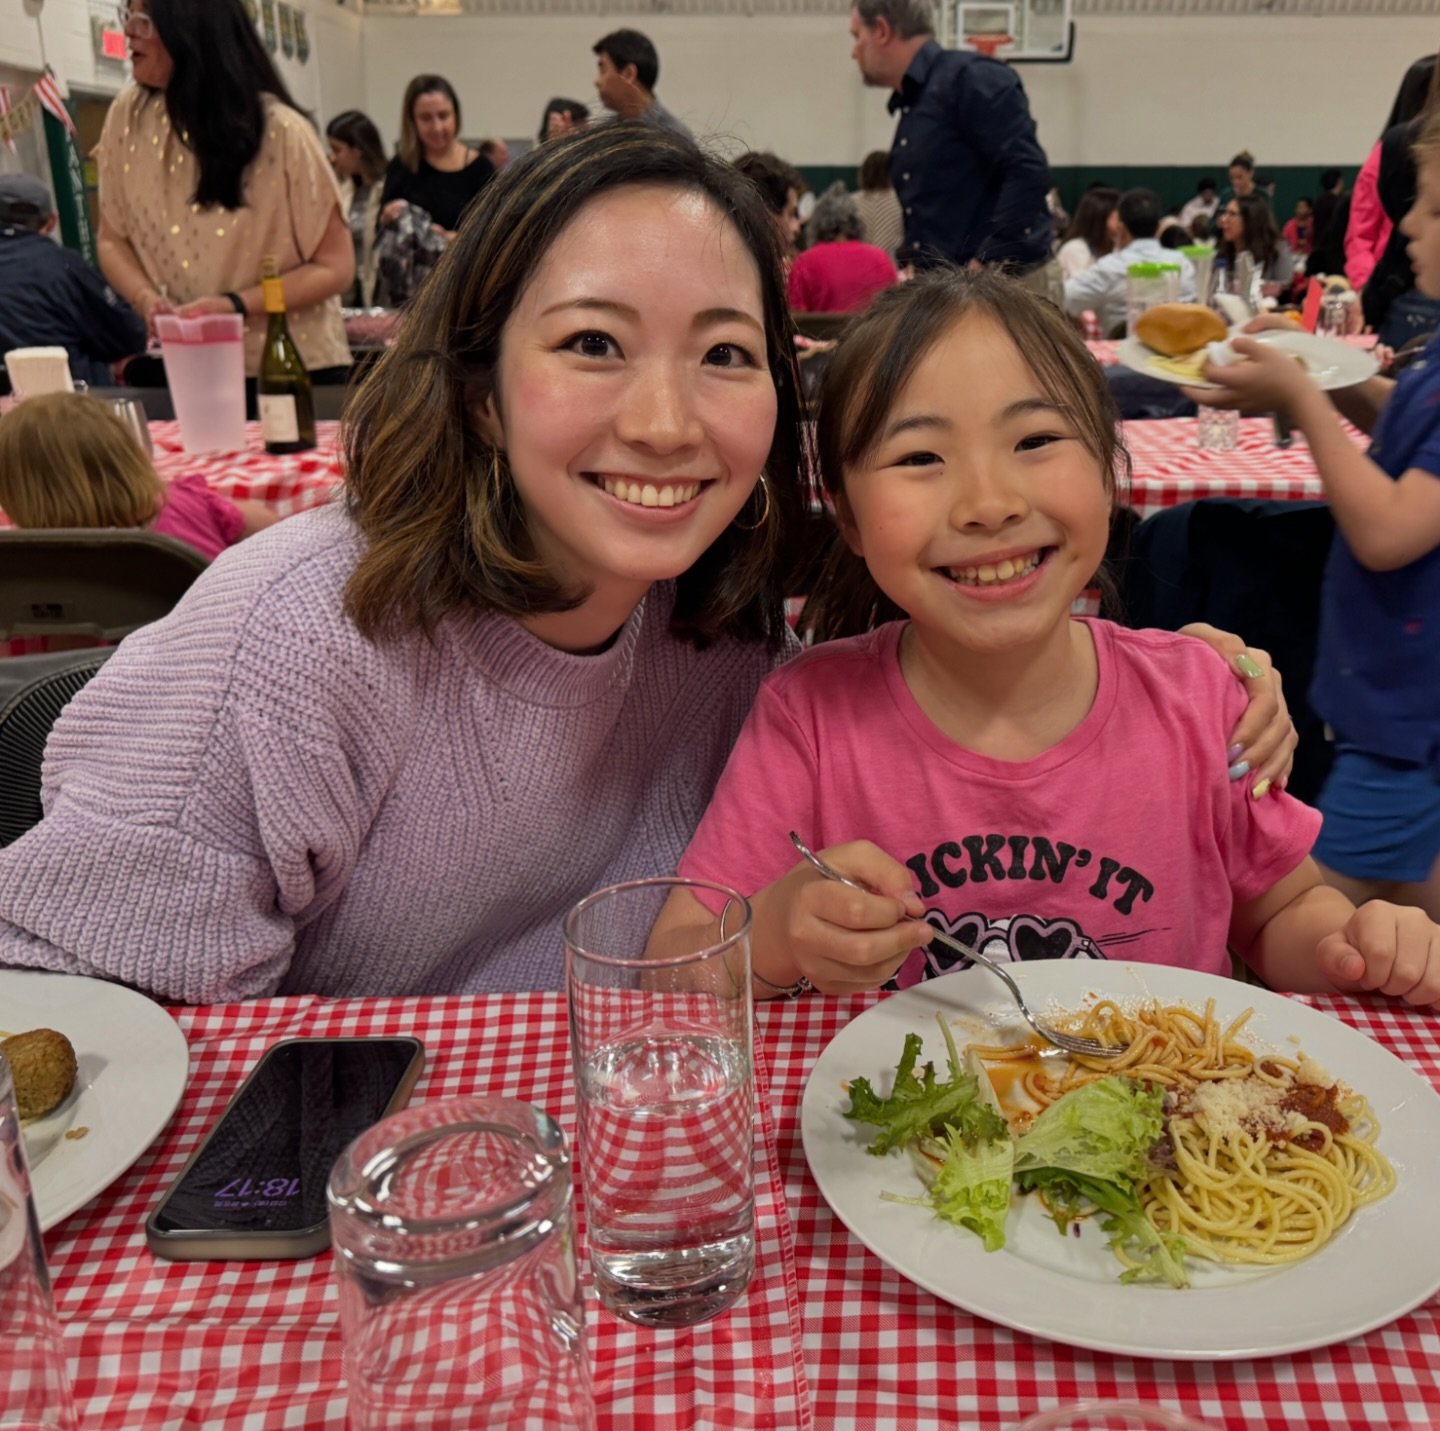 In this year&rsquo;s PPA Pasta Family Night, over 350 members of our Priory community gathered to celebrate our close-knit family and enjoy a delicious pasta meal prepared by our amazing in-house chef, Richard. Sharing a meal as a big family highligh